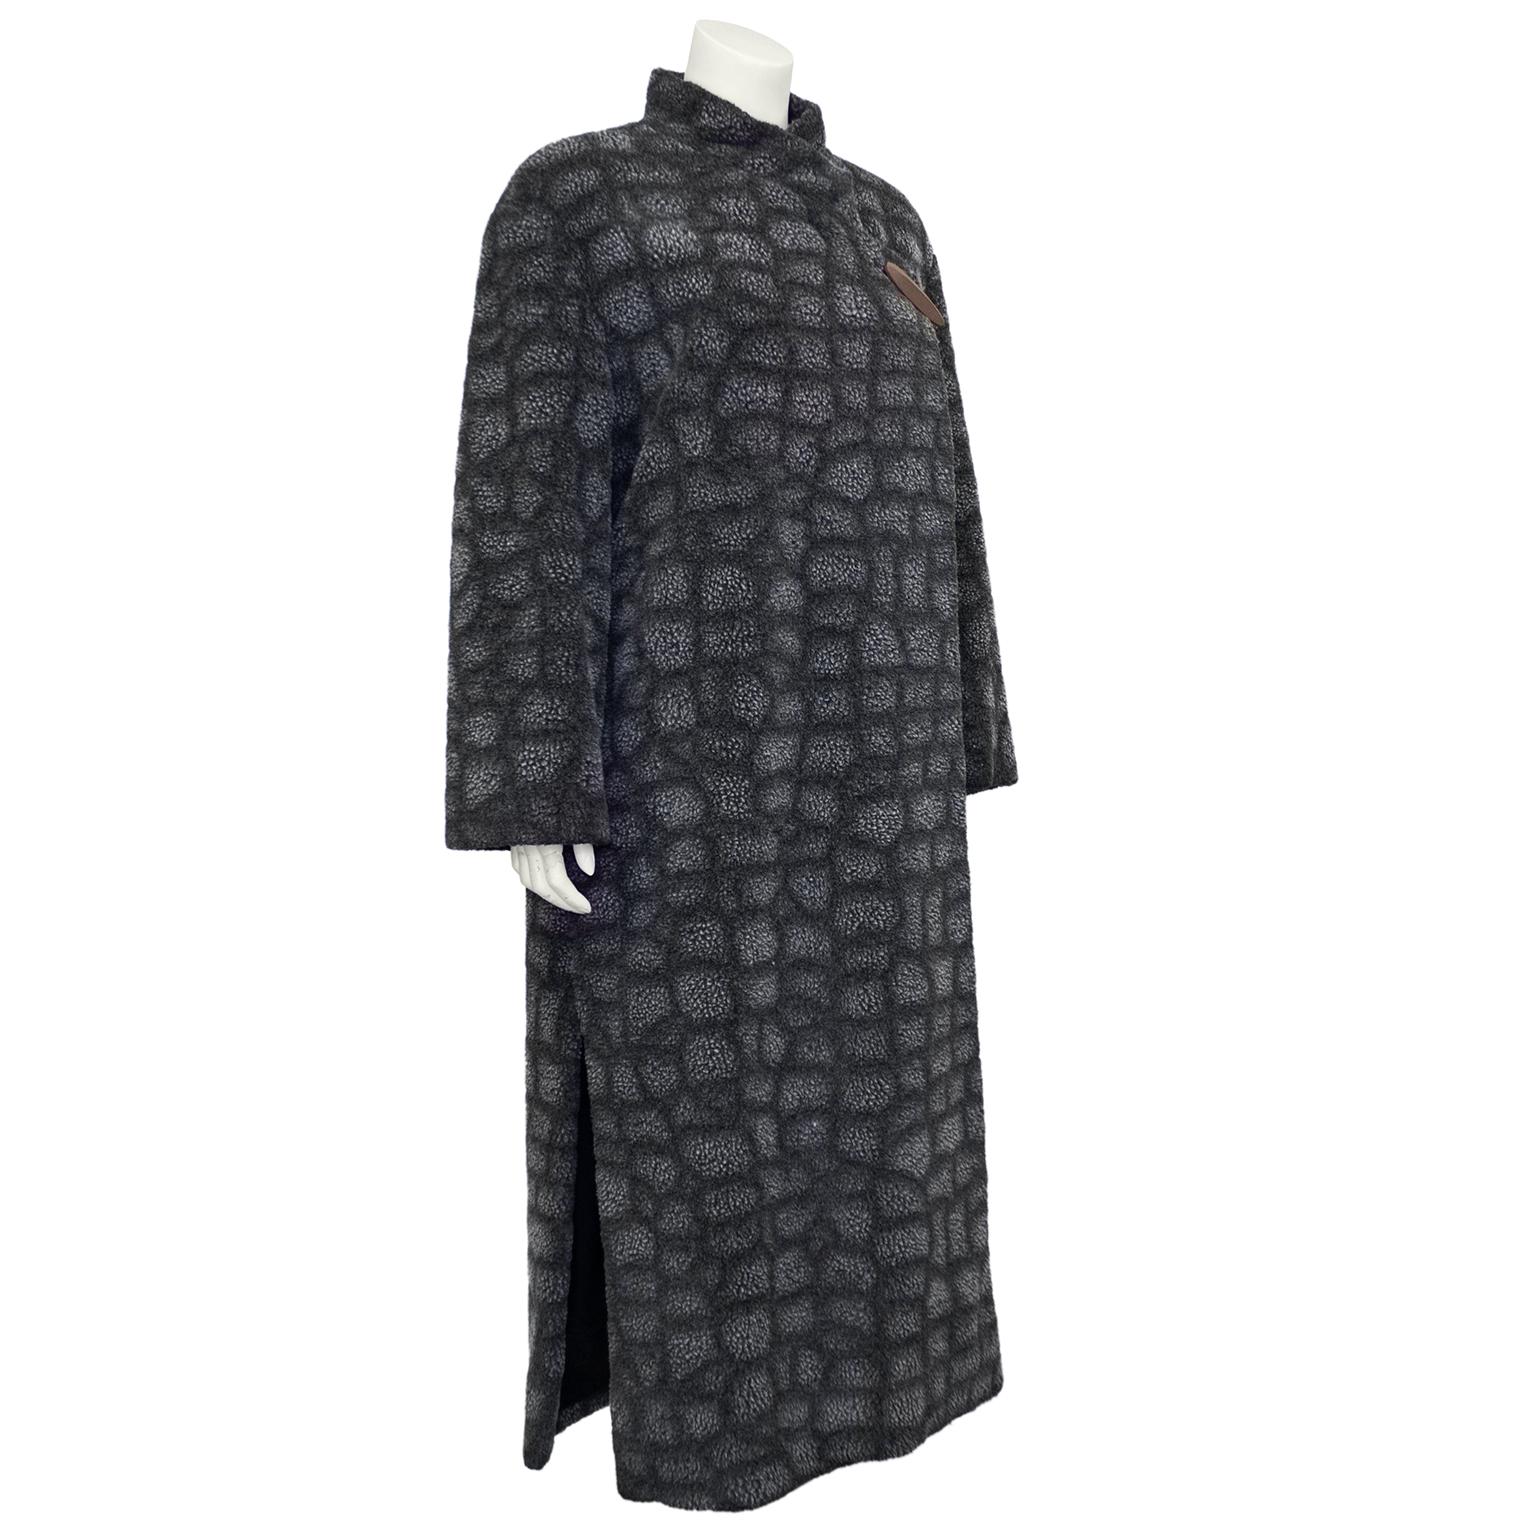 Krizia coat from the 1980s. Faux shearling with an all over dark and light grey crackle print. Wrap style that is secured by a single long oval wood button. Wrap style creates a standing tulip collar. Long slits at both side seams make it easy to